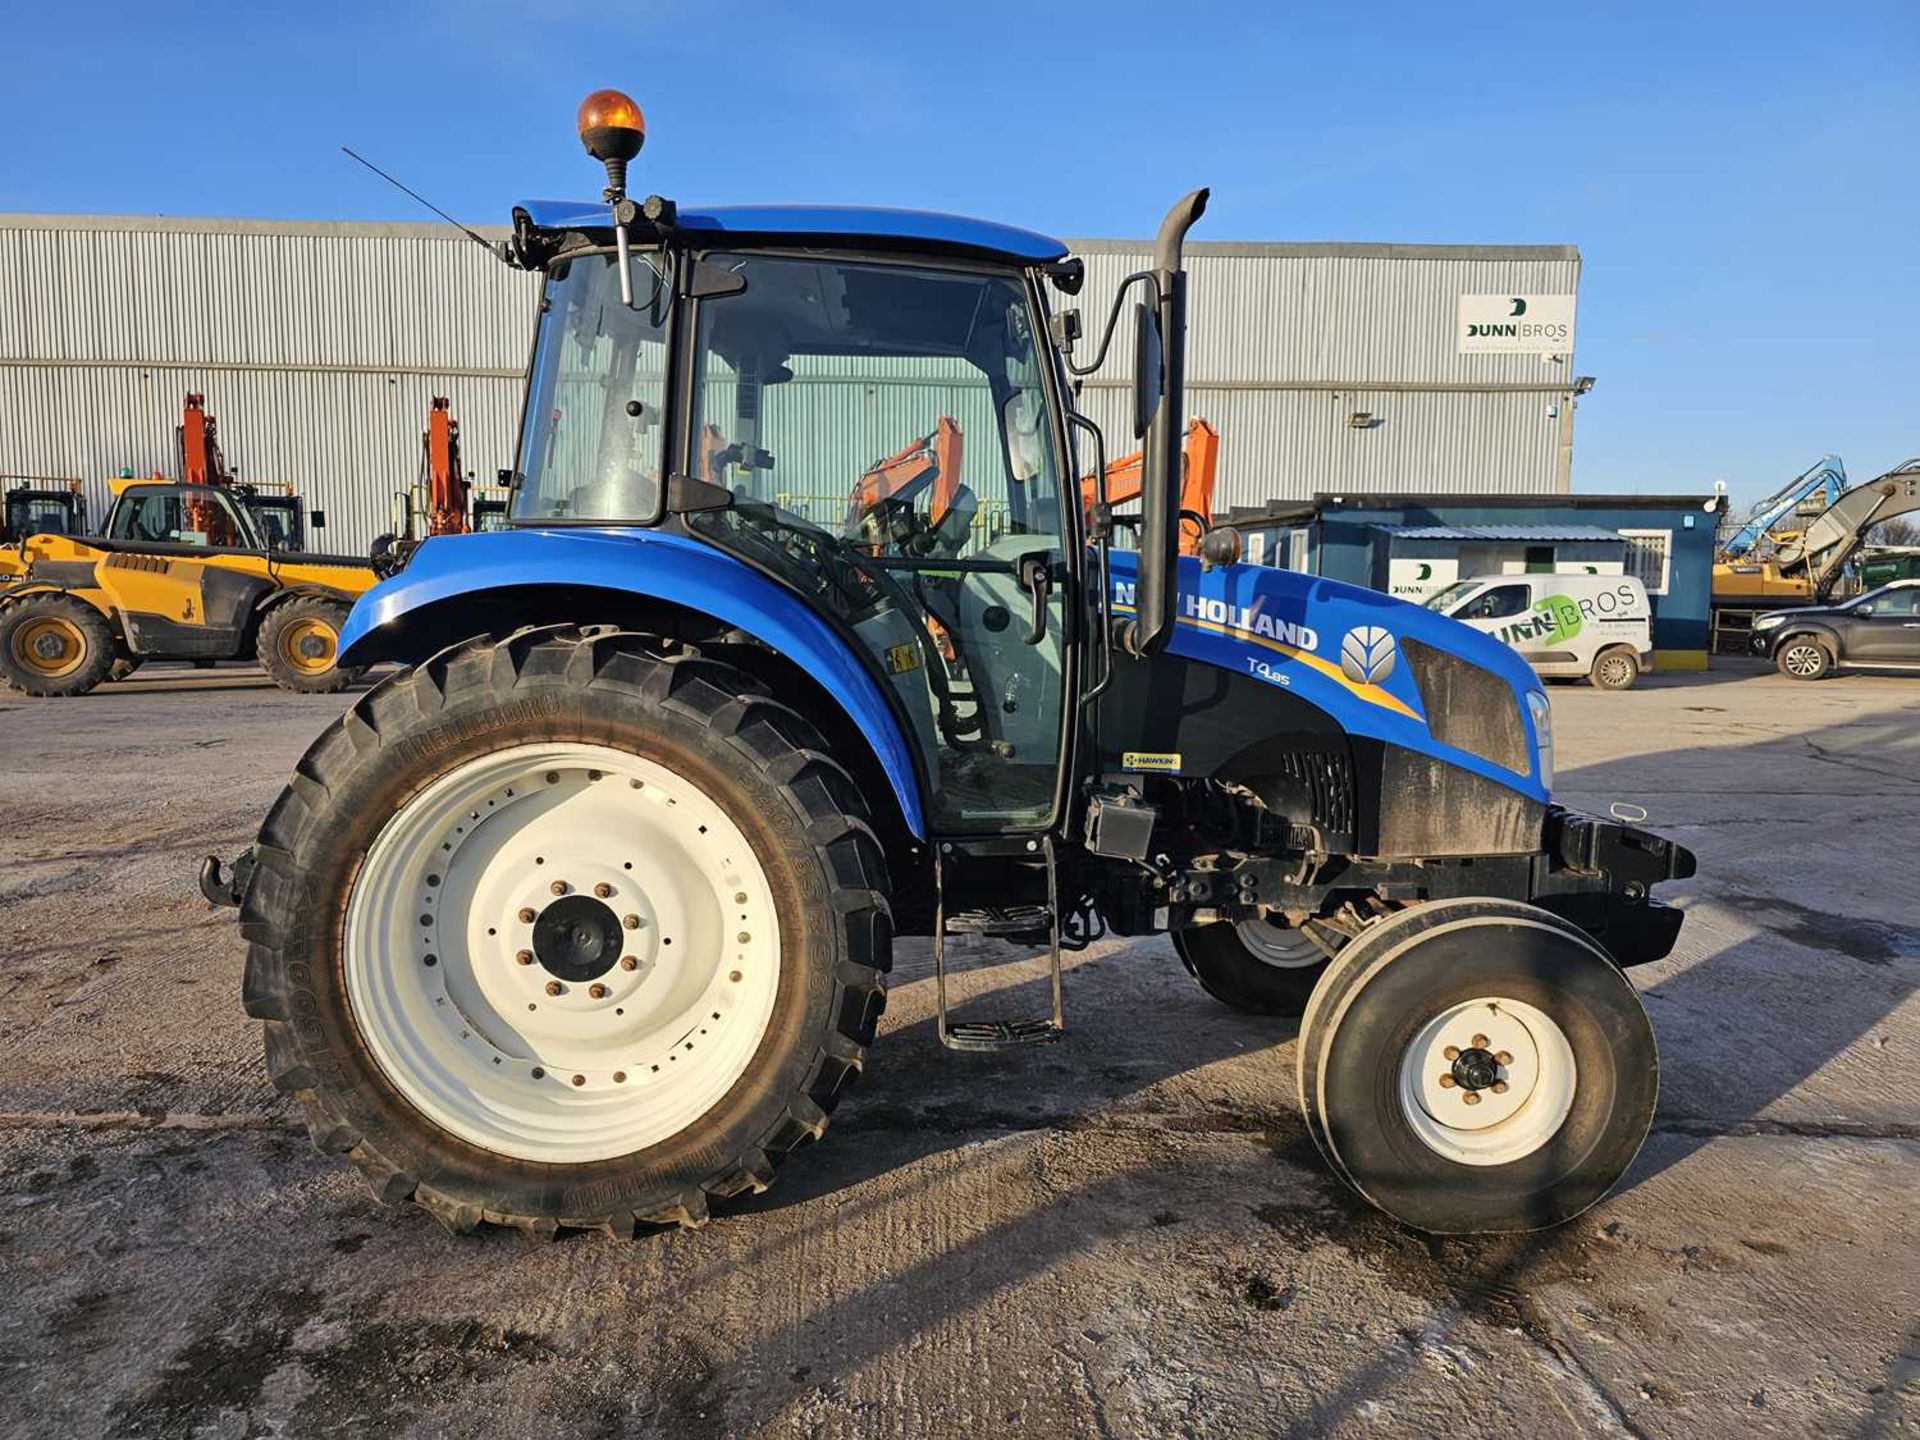 2015 New Holland T4.85 2WD Tractor, Front Weights, 2 Spool Valves, A/C - Image 6 of 28